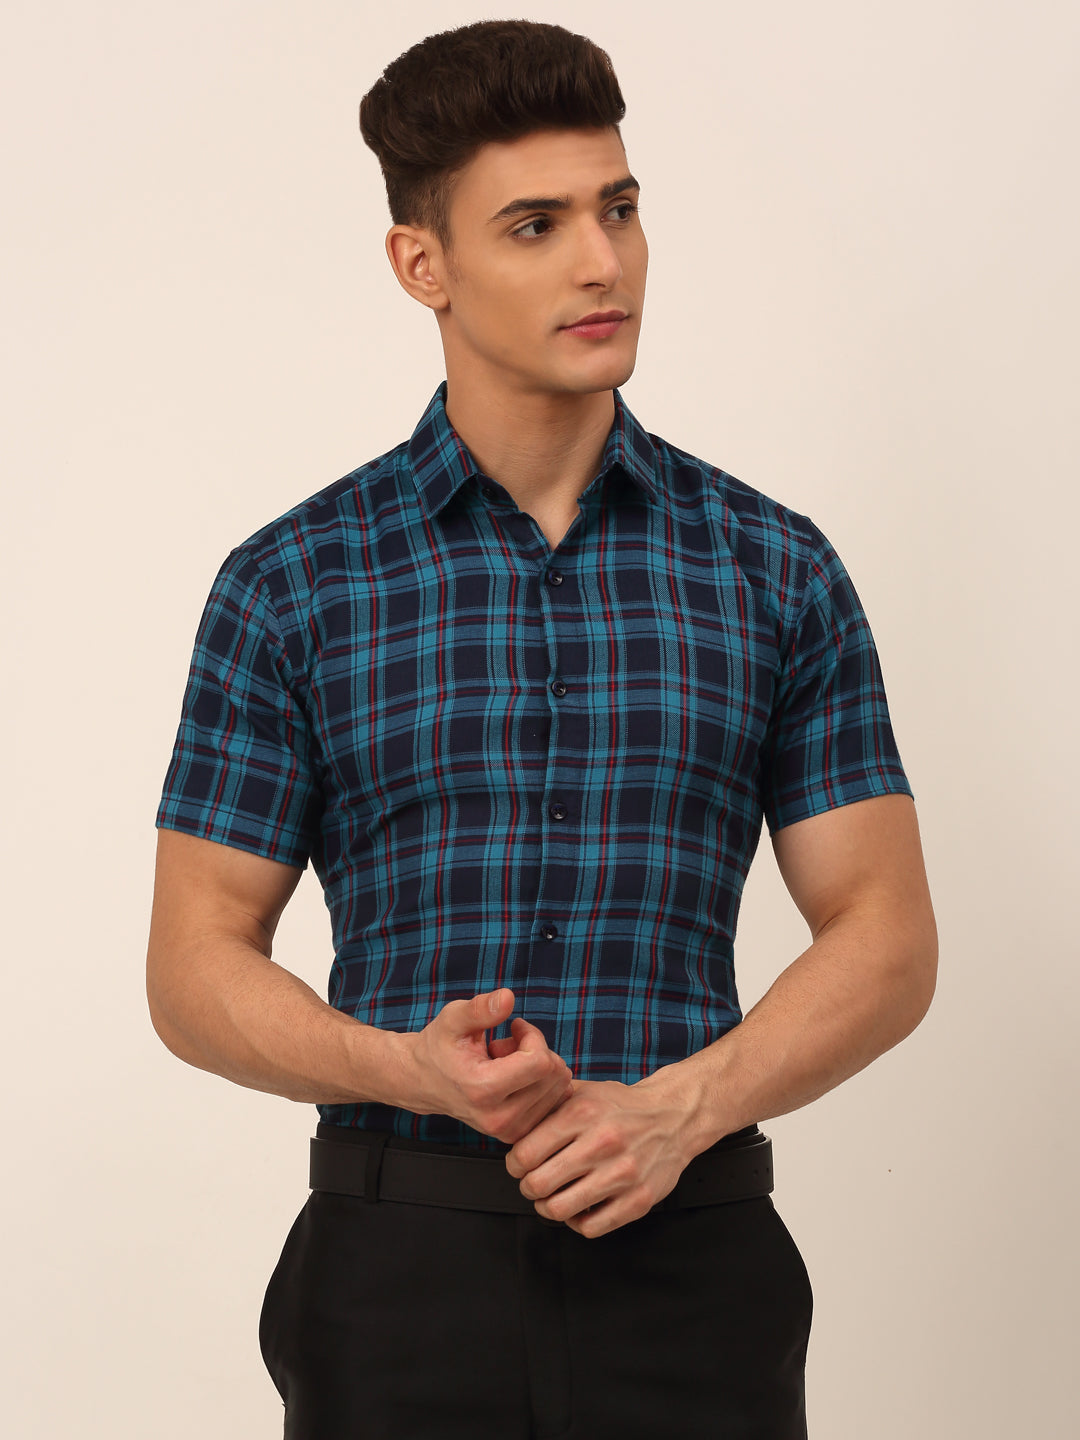 Men's Cotton Checked Half Sleeves Formal Shirts ( SF 818Sky-Blue )